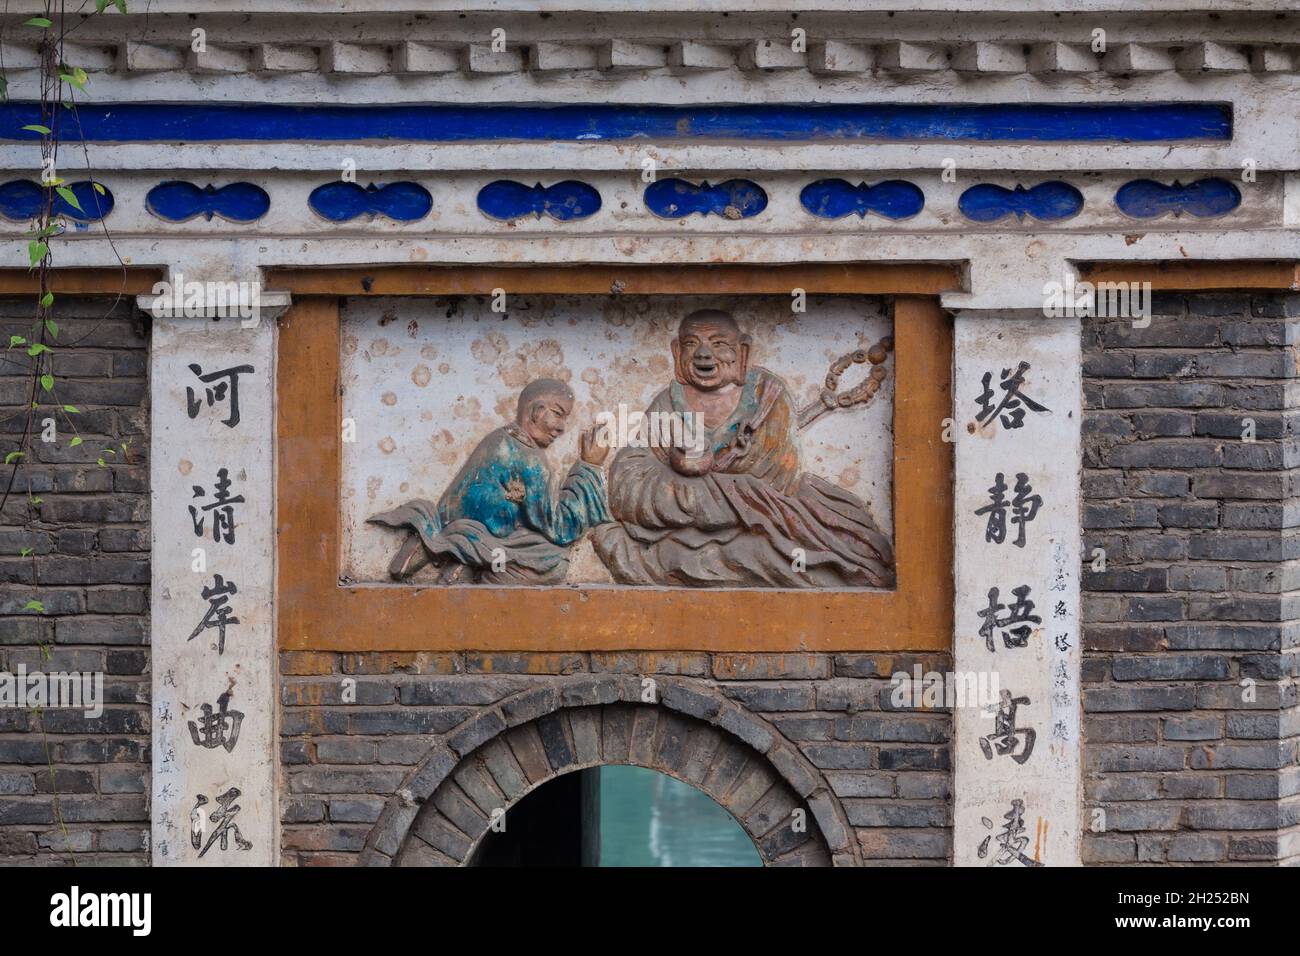 A bas relief frieze of Buddha over a small gate through the city wall of the Fenghuang Ancient Town, China. Stock Photo